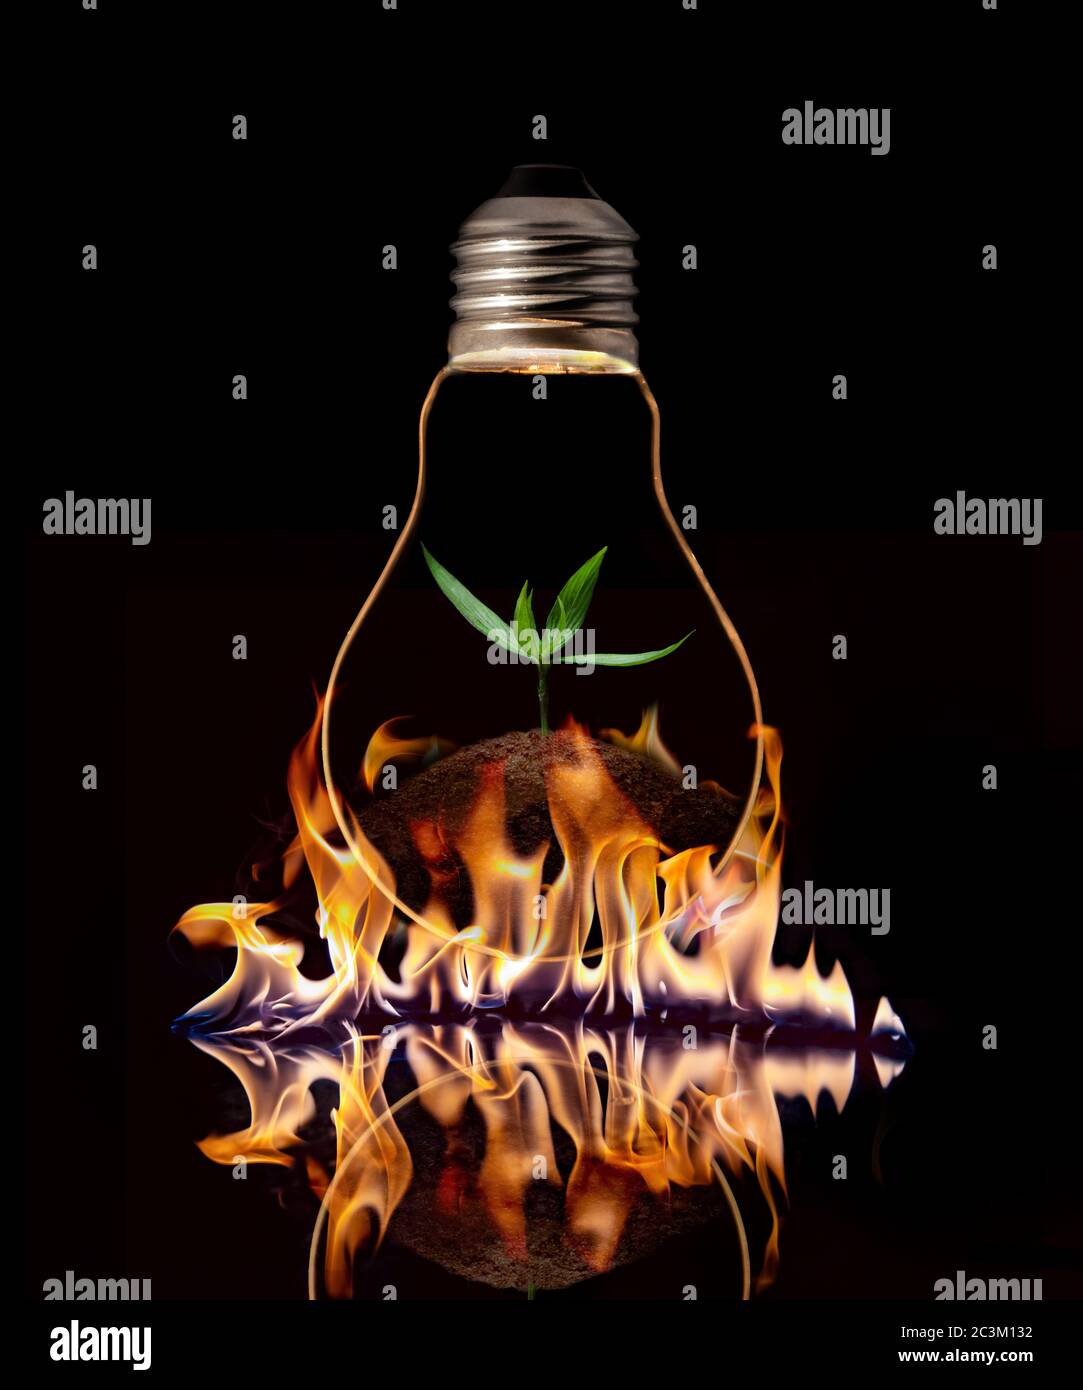 A light bulb with fresh green leaves inside on the fire, isolated on black background. Stock Photo